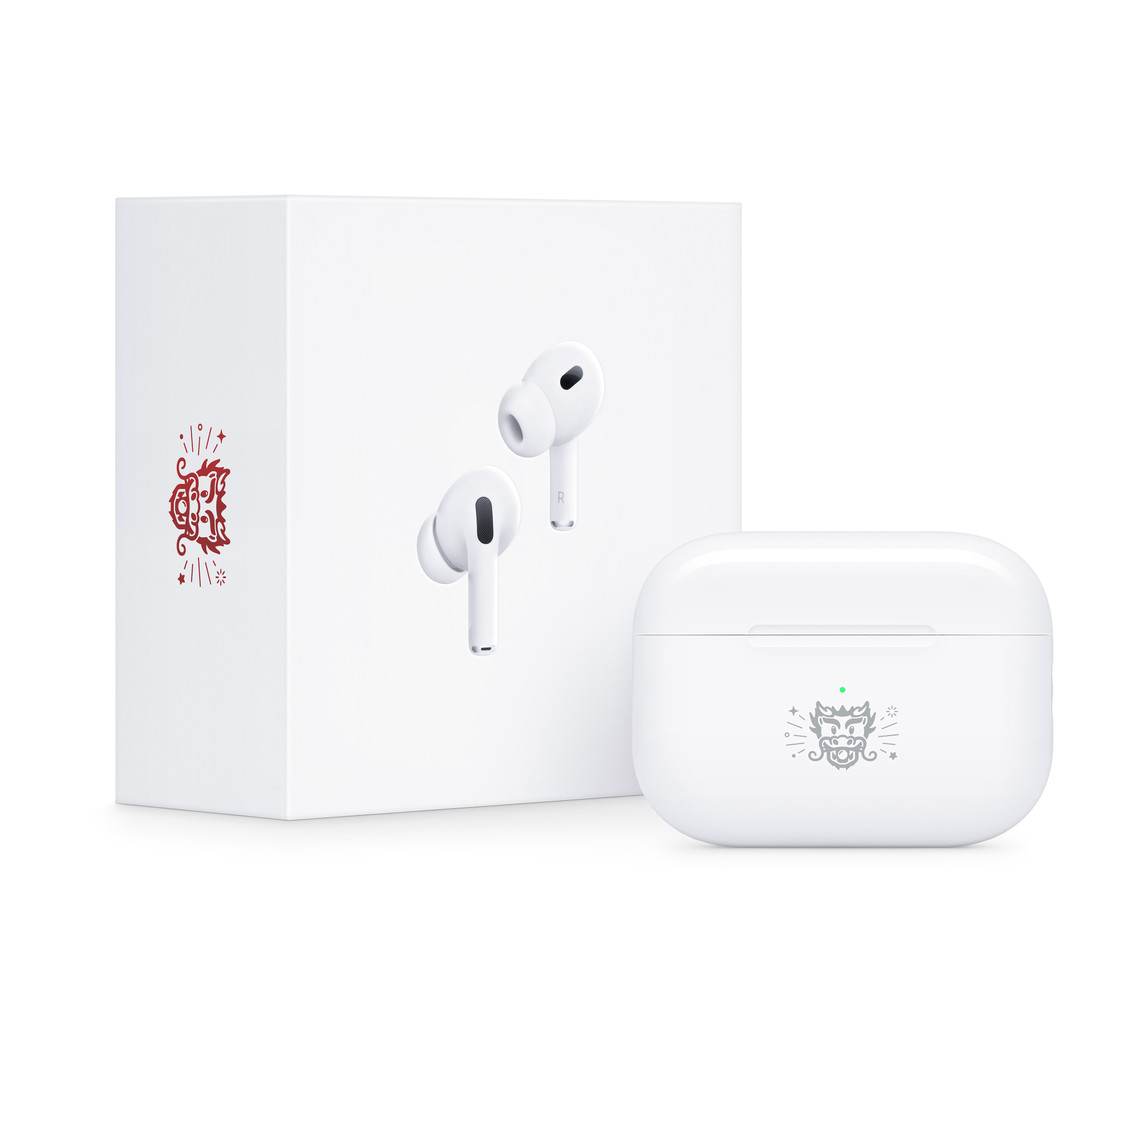 AirPods Pro 龍年特別款 AirPods Pro 2